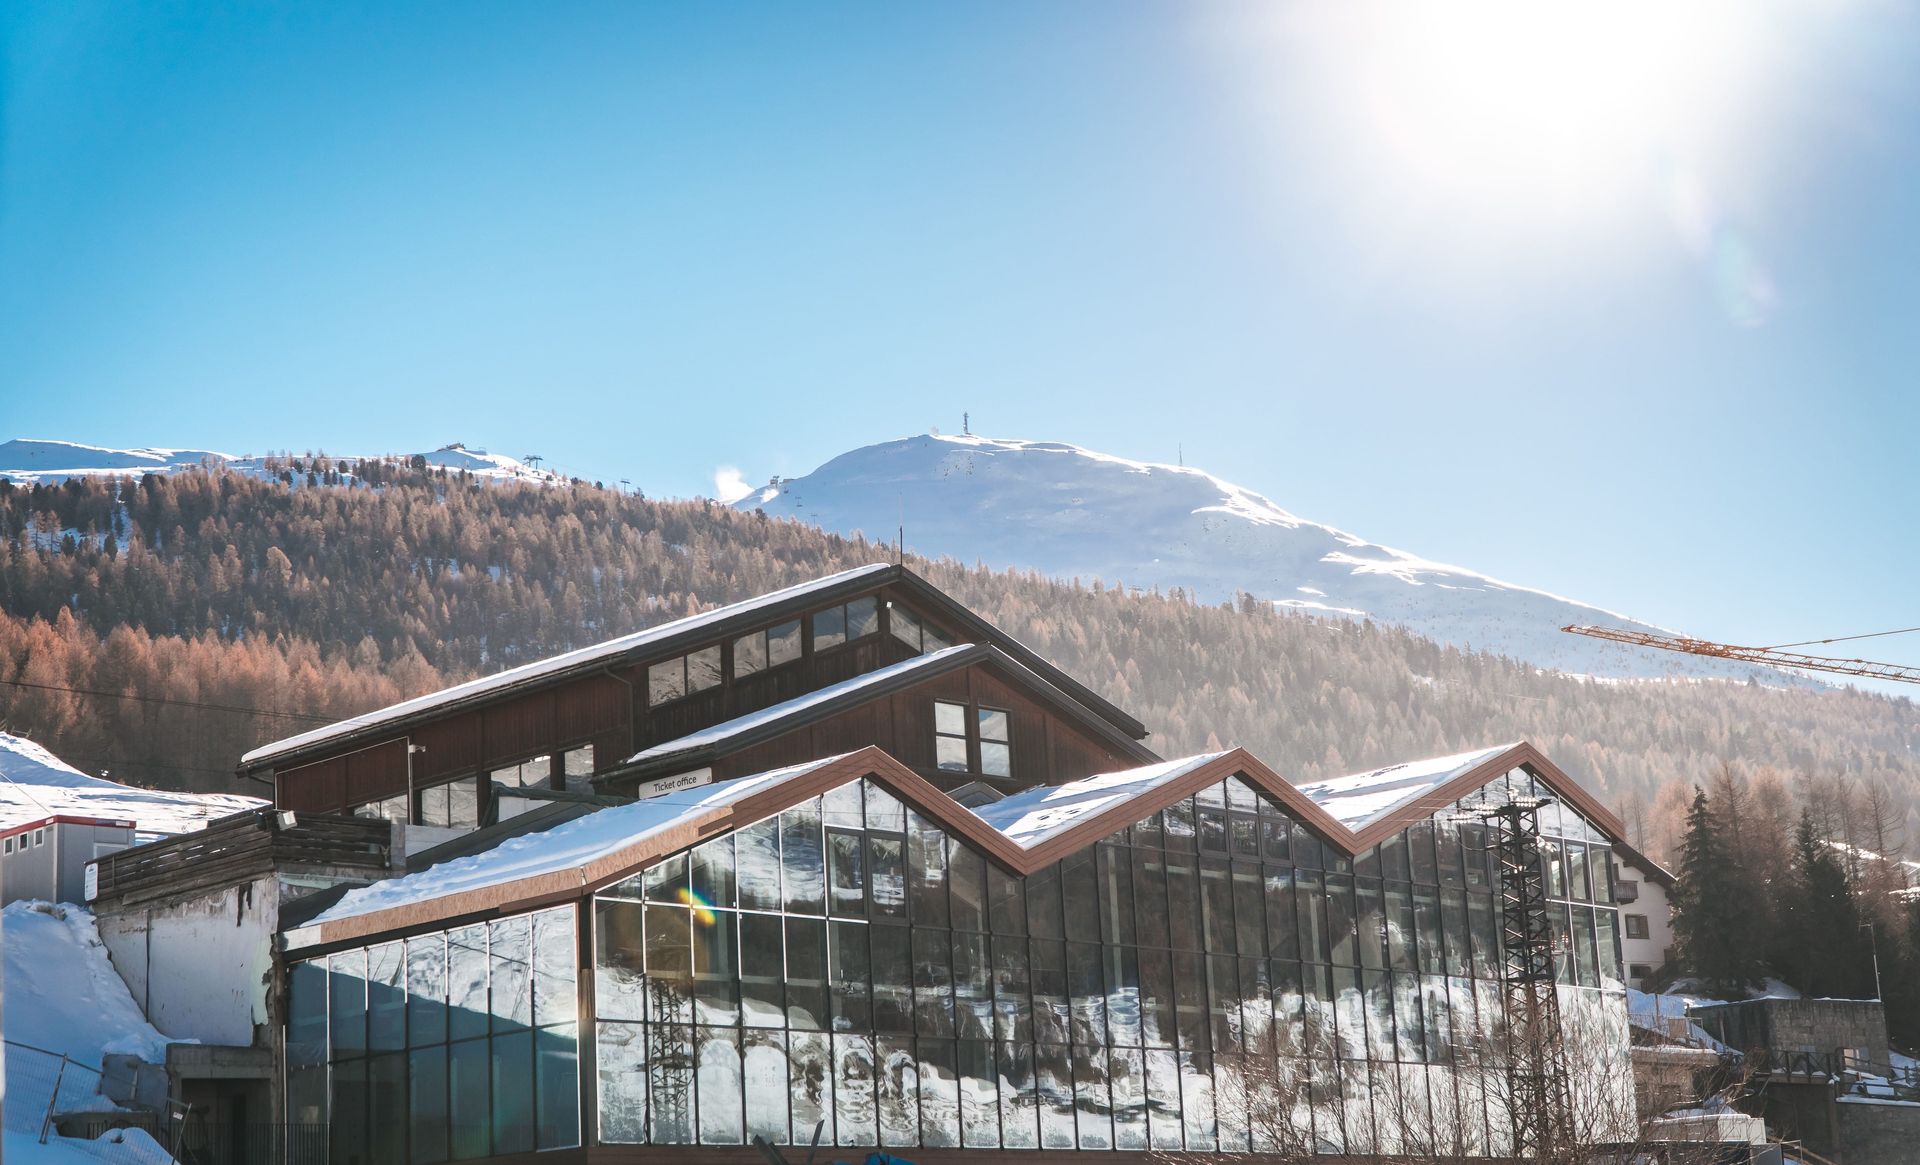 The co-working space opens onto the ski slopes of Livigno